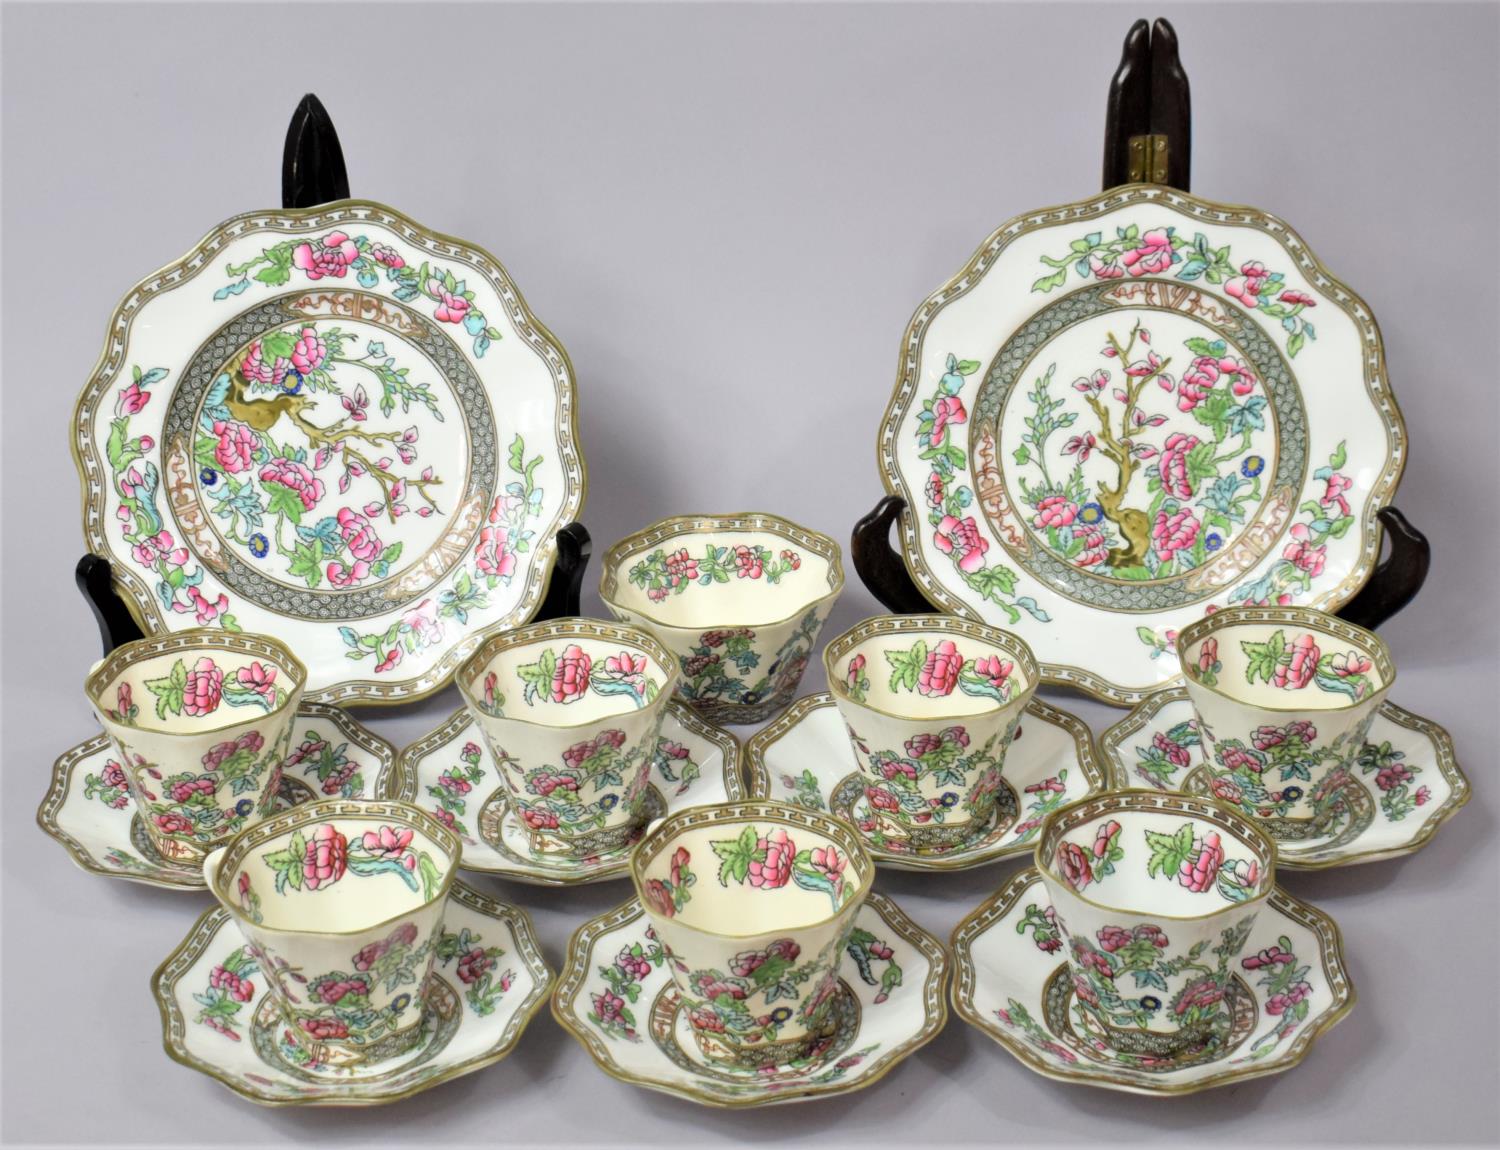 An Indian Tree Coffee Set to comprise Seven Cups, Two Plates, Seven Saucers and a Sugar Bowl